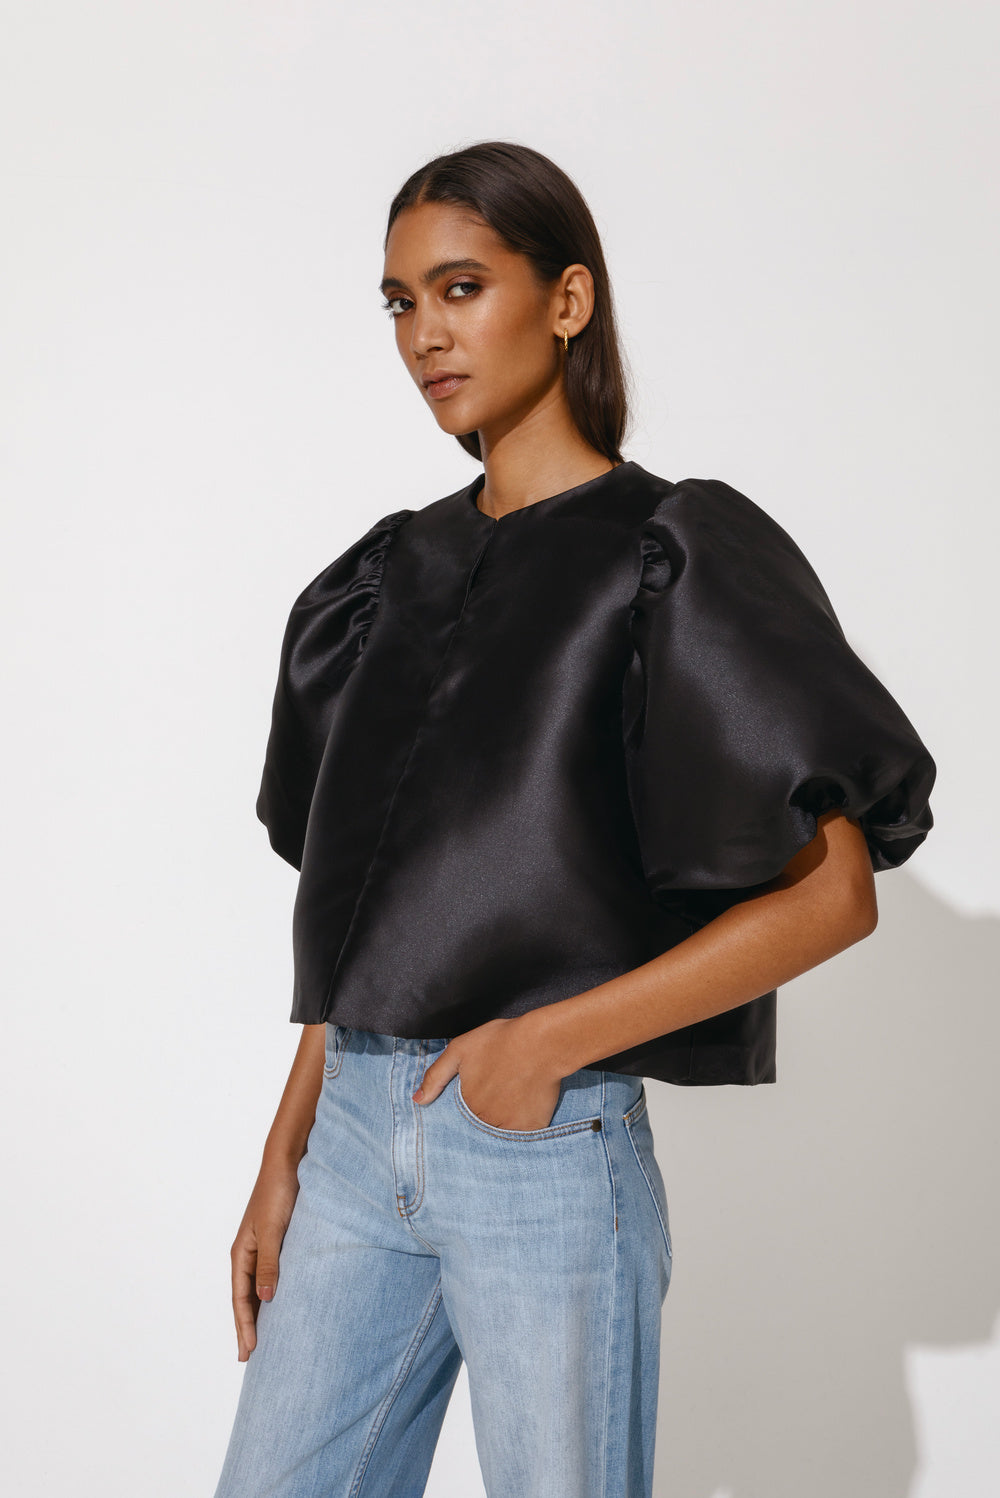 Cleo Short Sleeved Puff Black Blouse